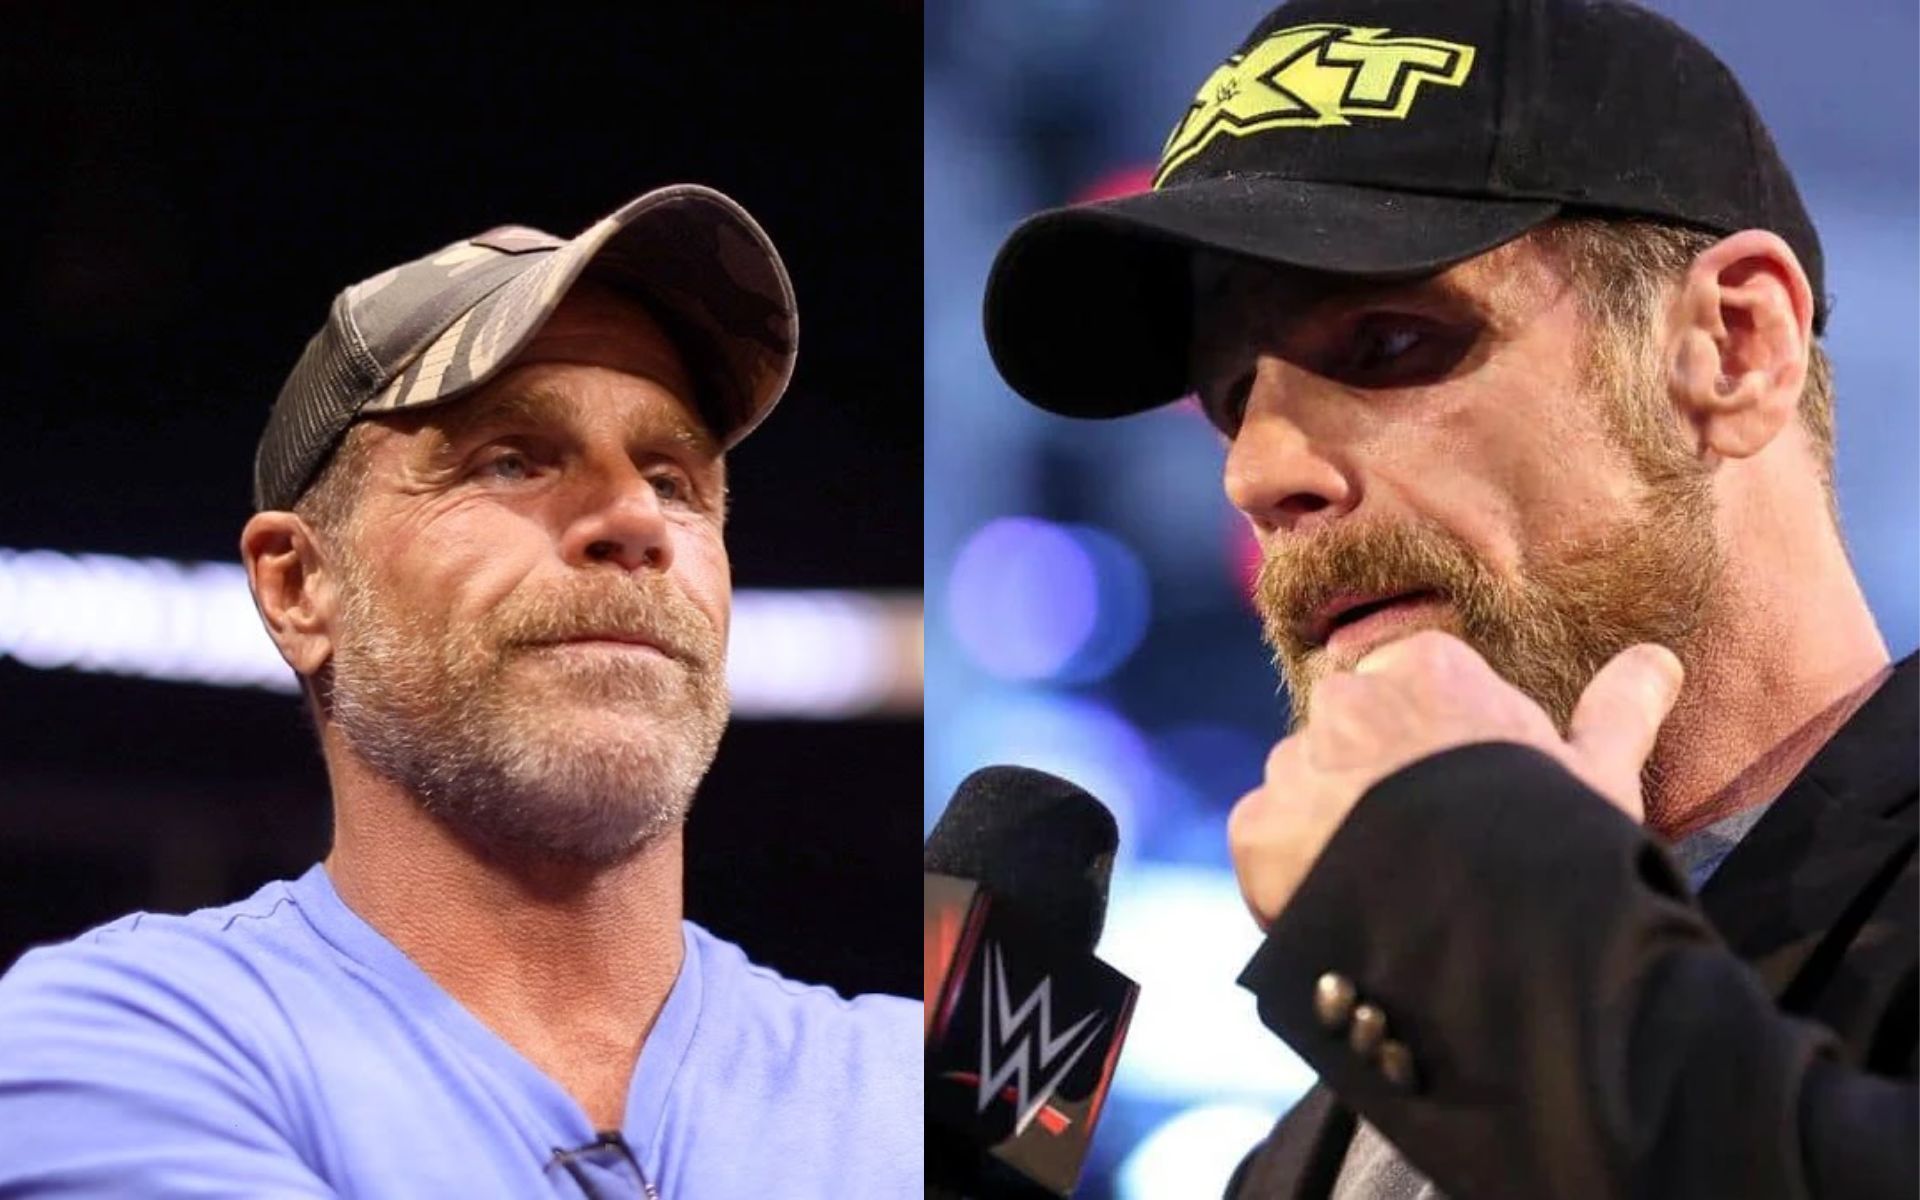 Shawn Michaels had an emotional greeting for superstar